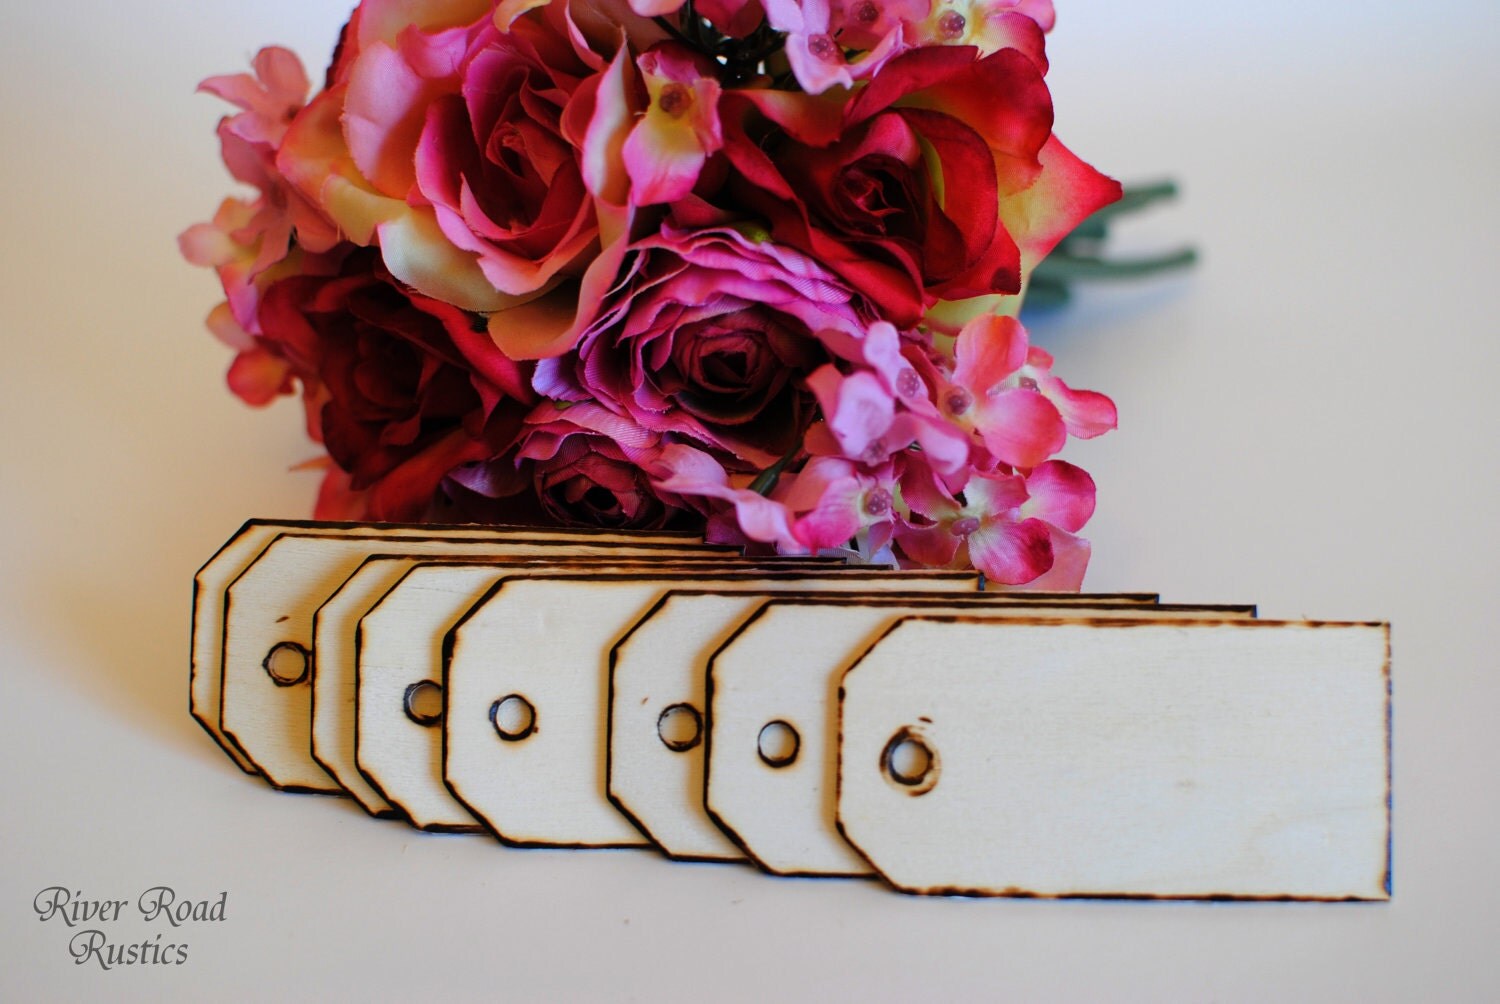 Rustic Wood Tags(-Medium Size Set Of 75-) for your Wishing Tree, Escort Cards, Place Cards, Favors, Gifts, Etc.